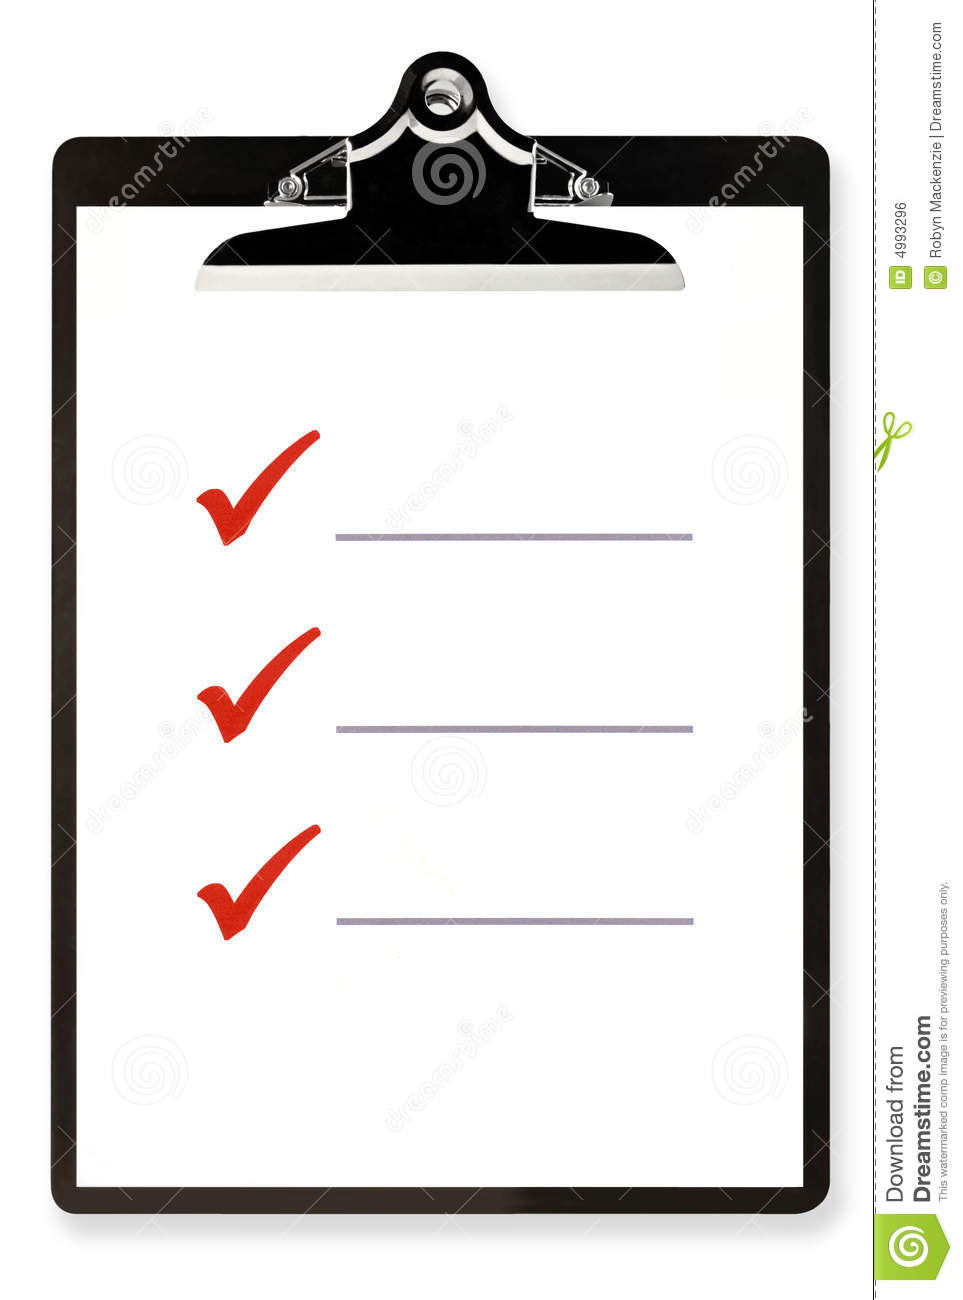 Go Back   Images For   Clipboard Checklist Clipart